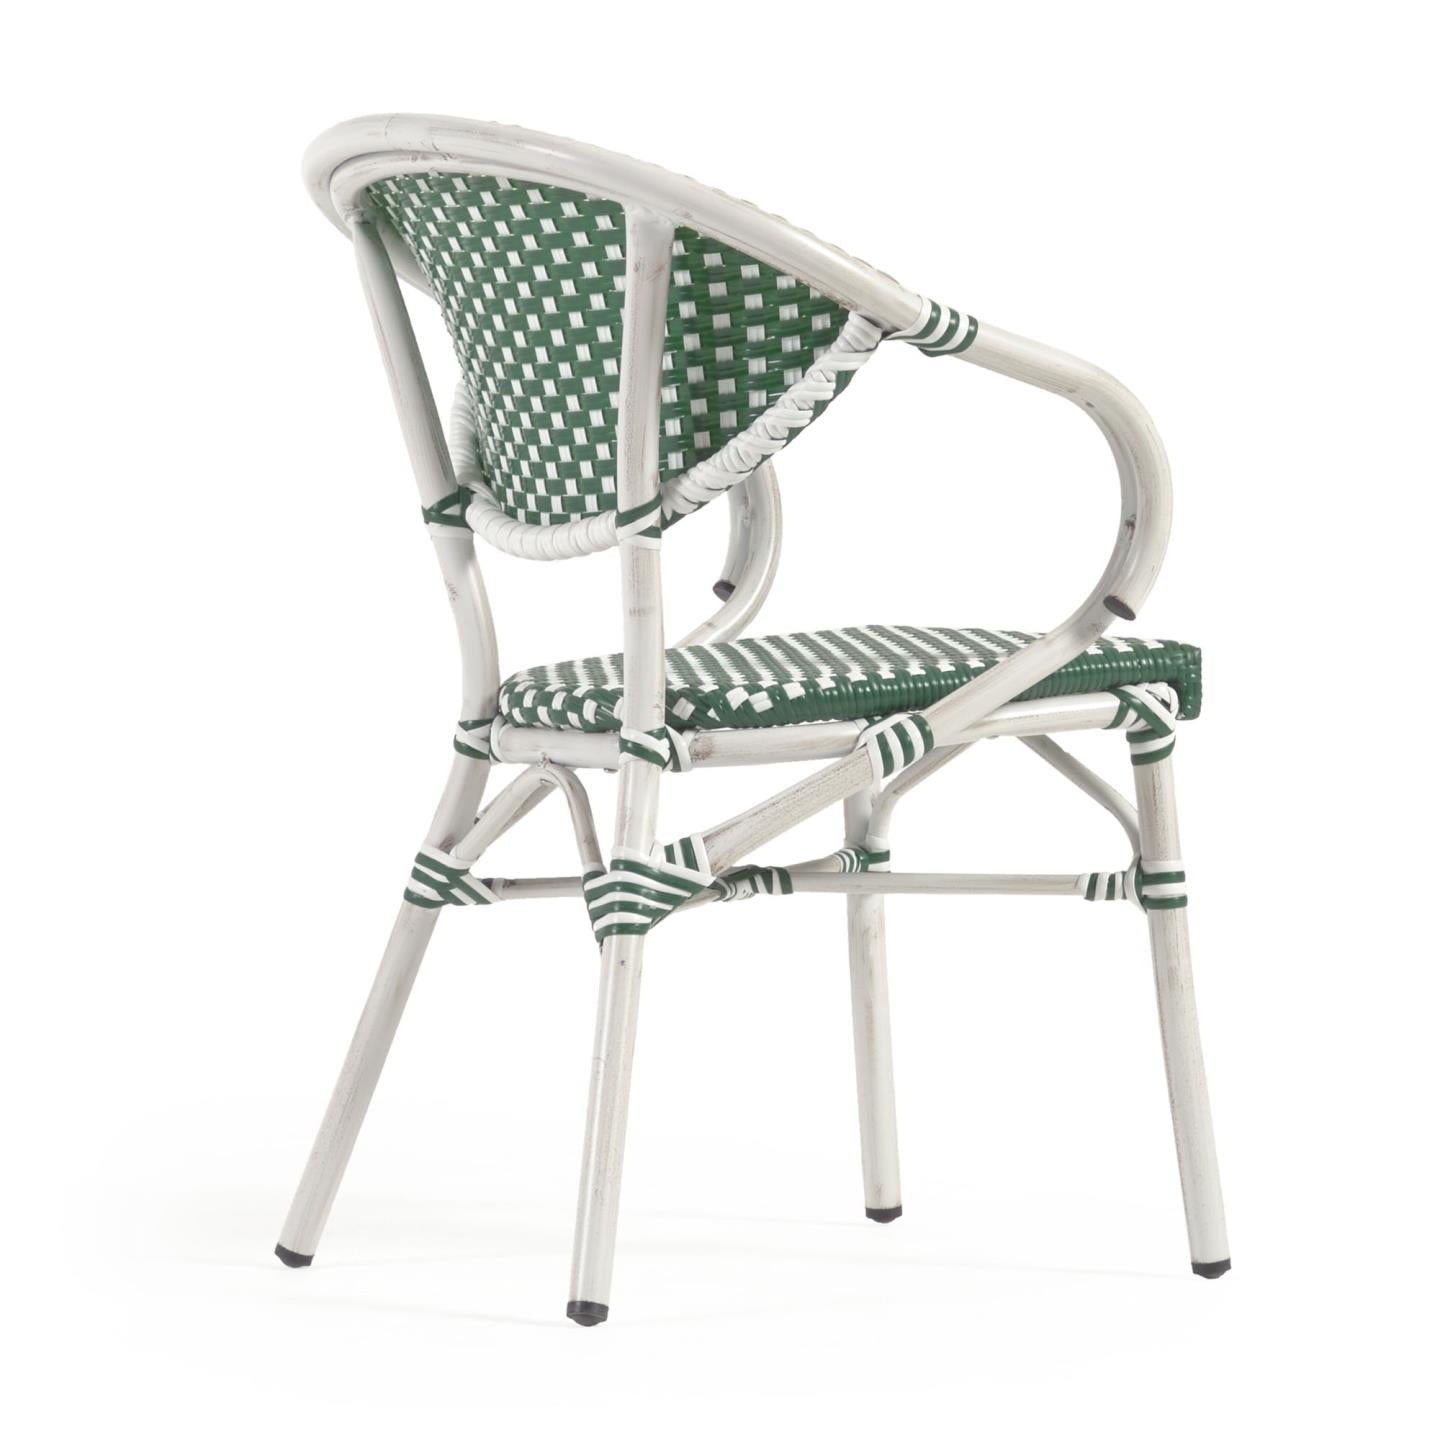 Marilyn stackable outdoor bistro chair with arms in aluminium and synthetic rattan, green & white